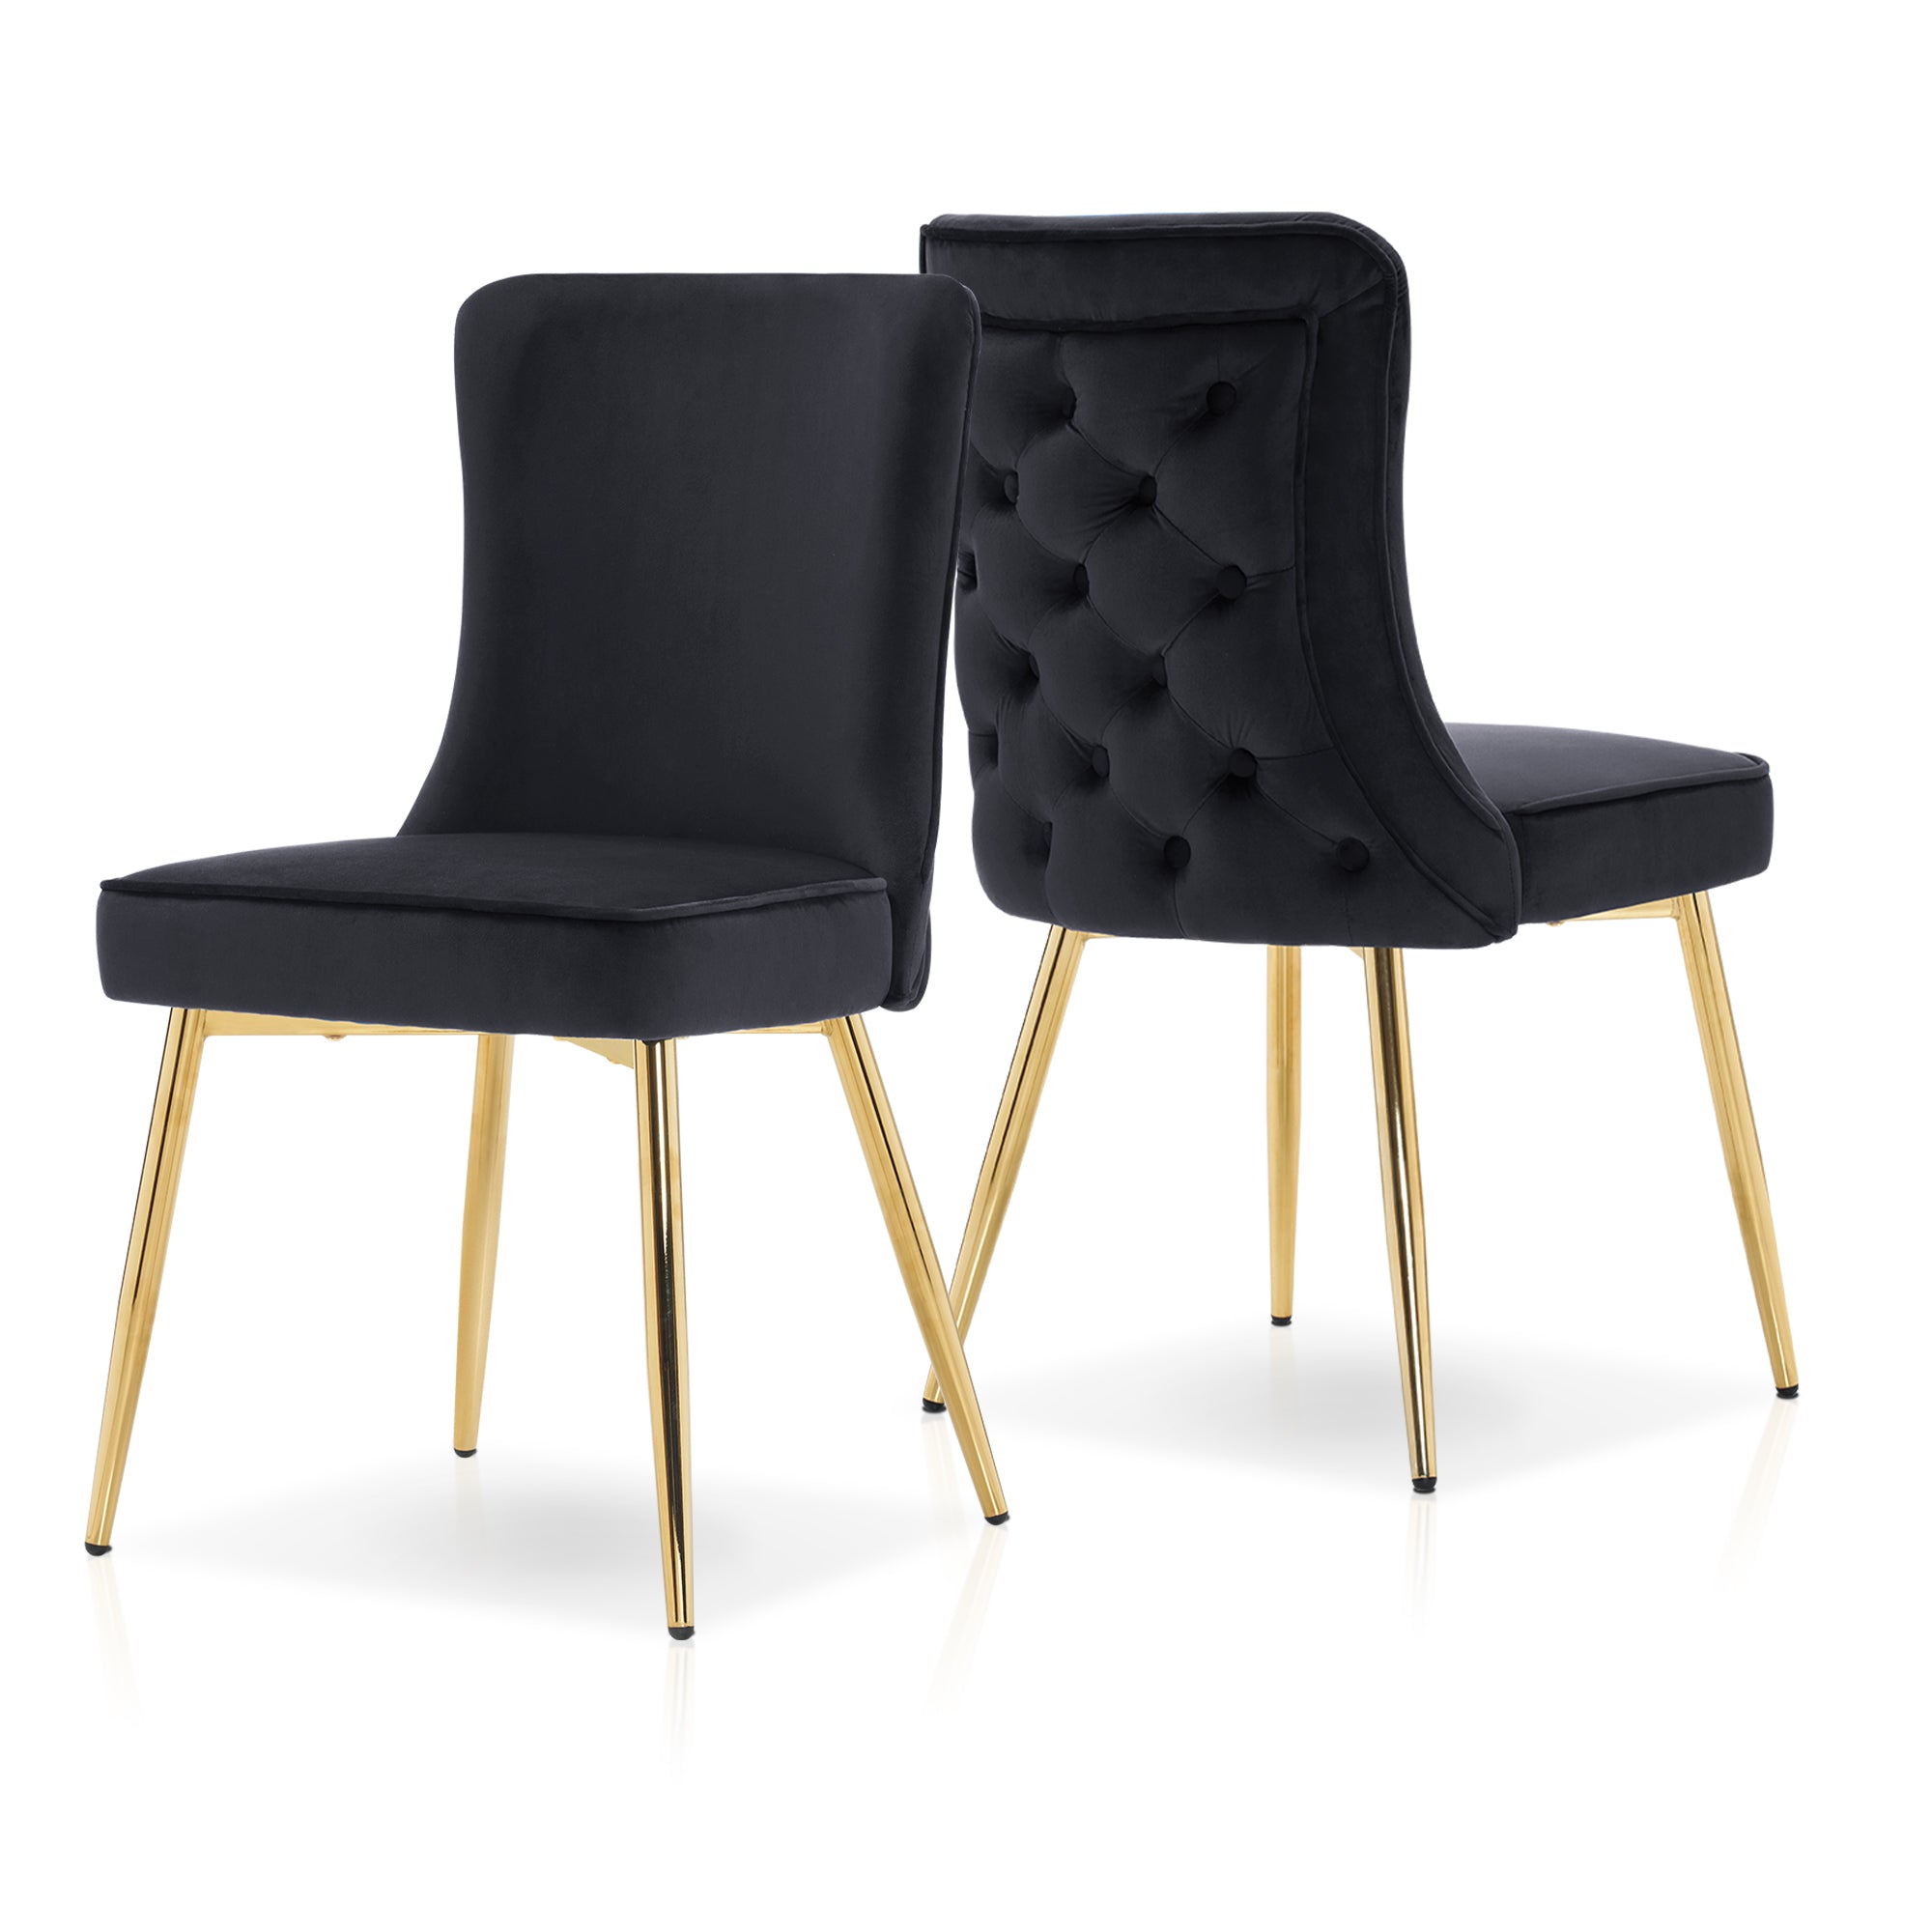 ivinta Tufted Dining Chair Set of 2, Luxury Black Tufted Button Back Dining Room Chair, Upholstery Accent Chair with Gold Legs, Mid-Century Modern Wingback Chair for Dining Room, Living Room